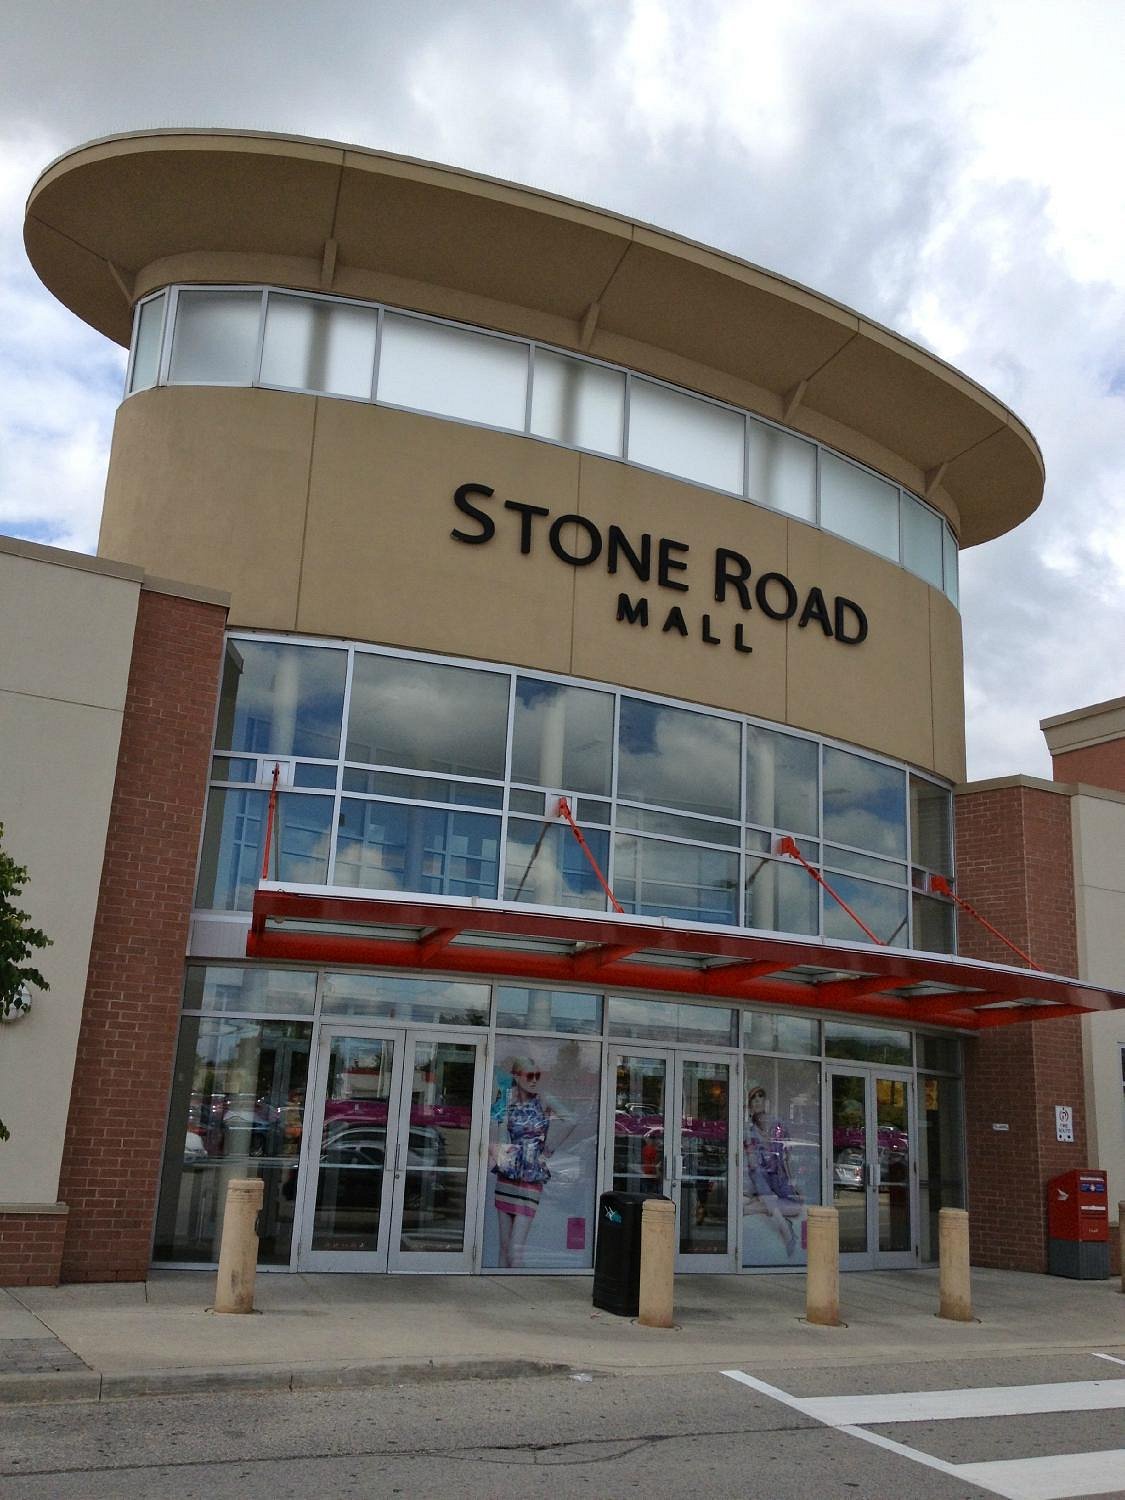 Stone Road Mall - We LOVE to see people shopping with these